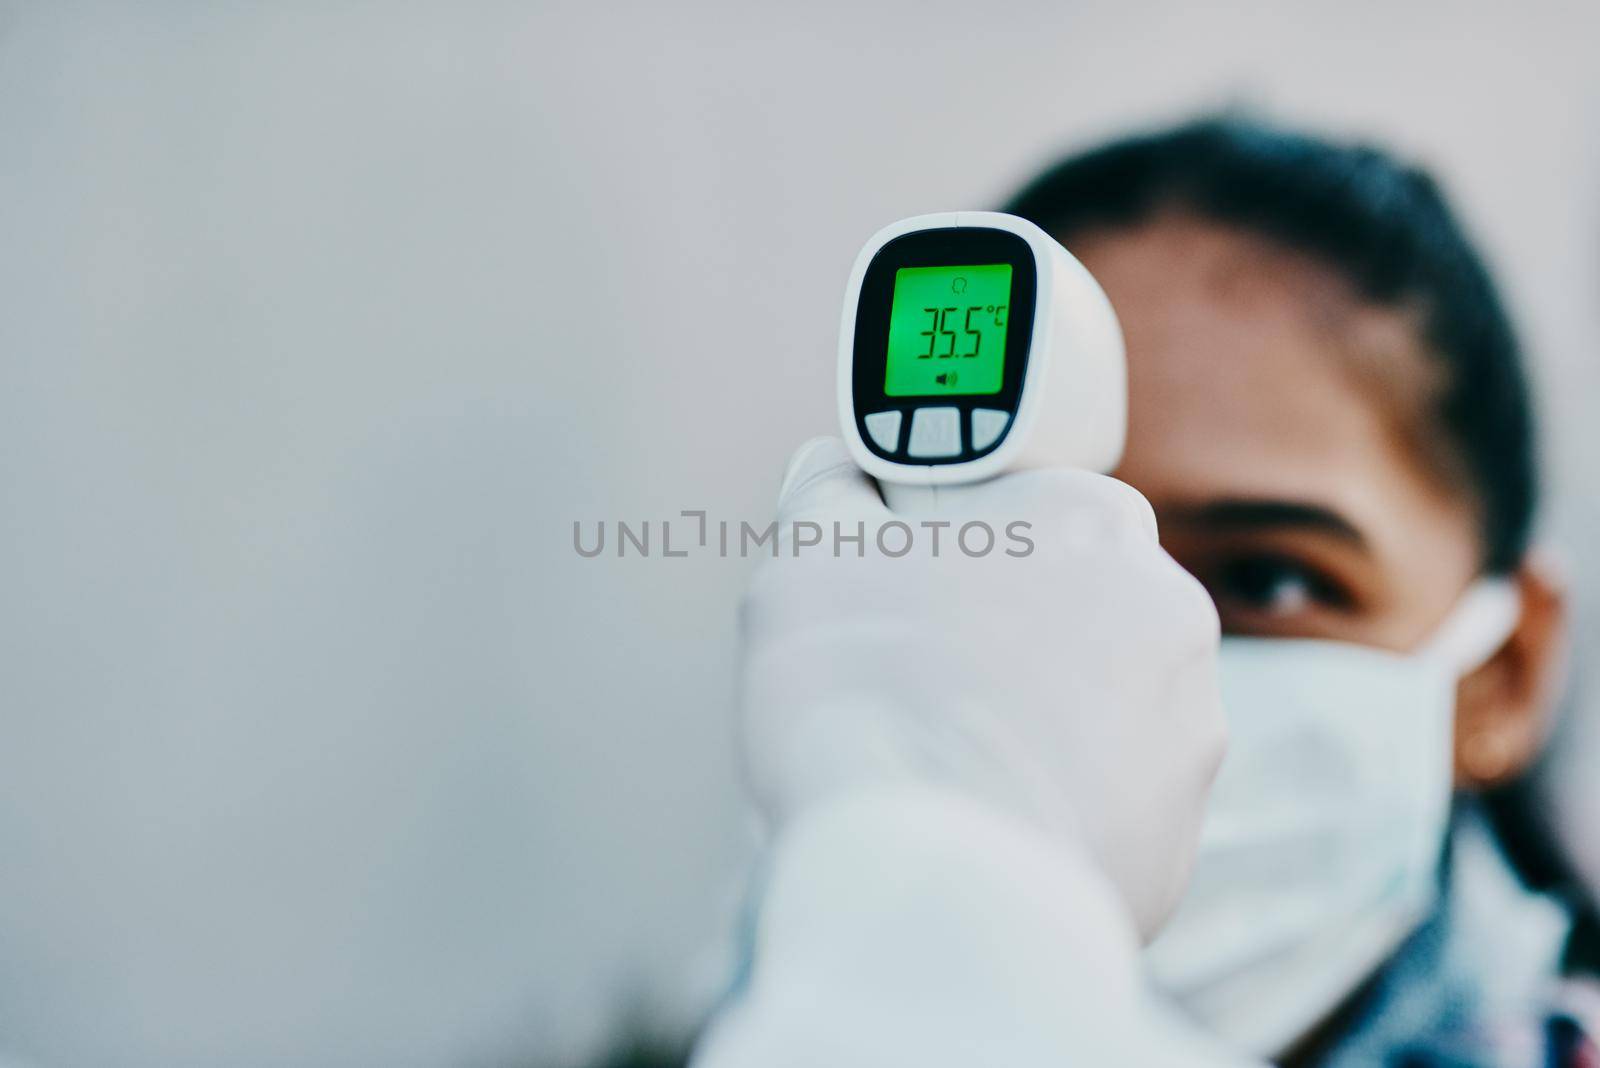 Cutting edge tech to help curb the spread. Shot of a young woman getting her temperature taken with an infrared thermometer by a healthcare worker during an outbreak. by YuriArcurs